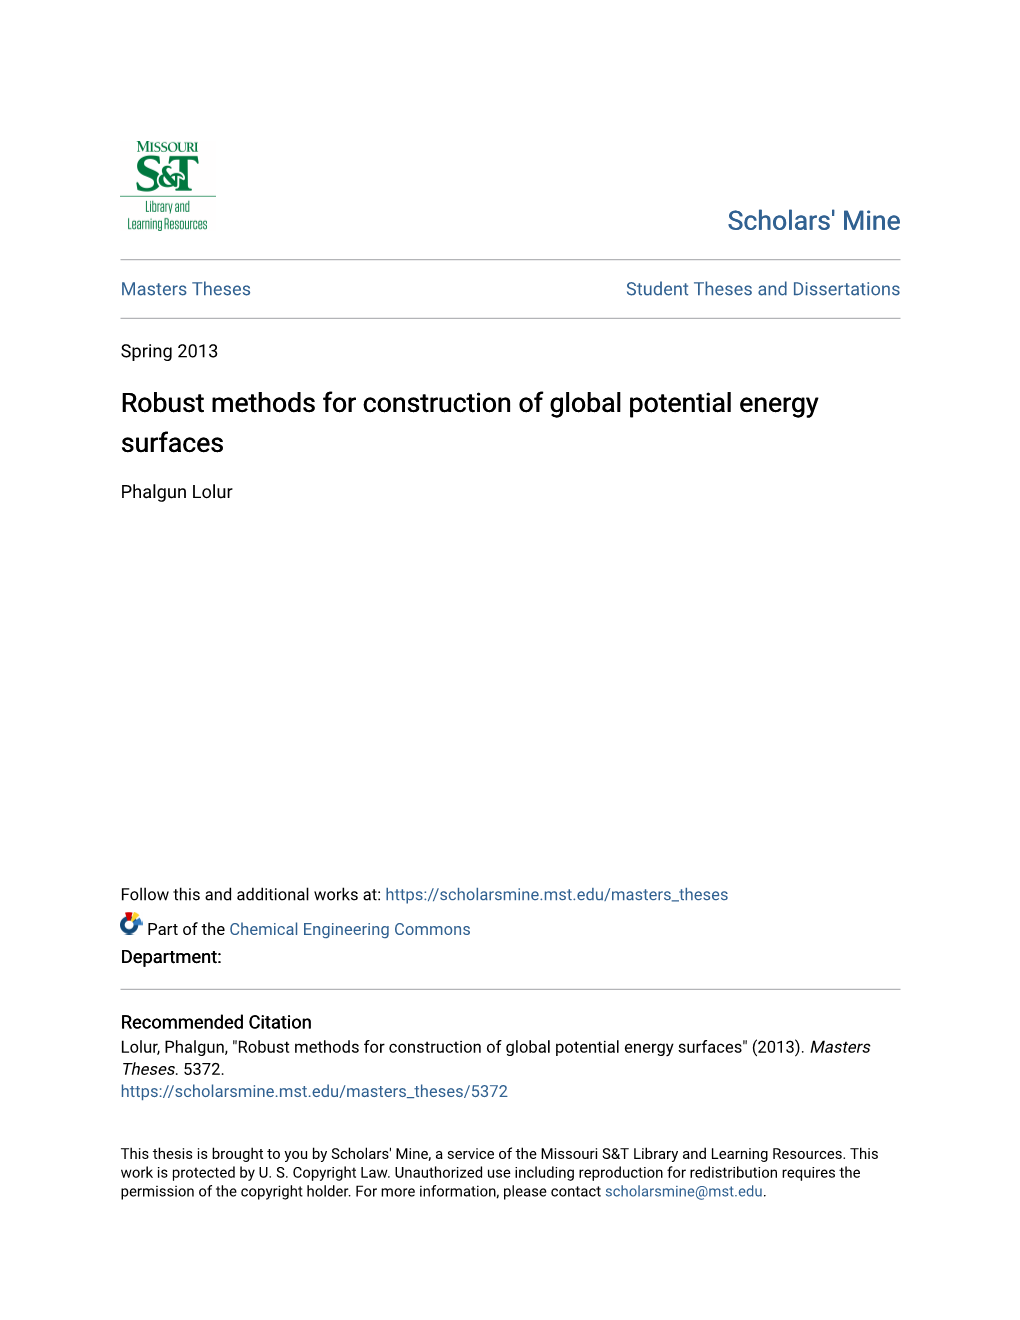 Robust Methods for Construction of Global Potential Energy Surfaces